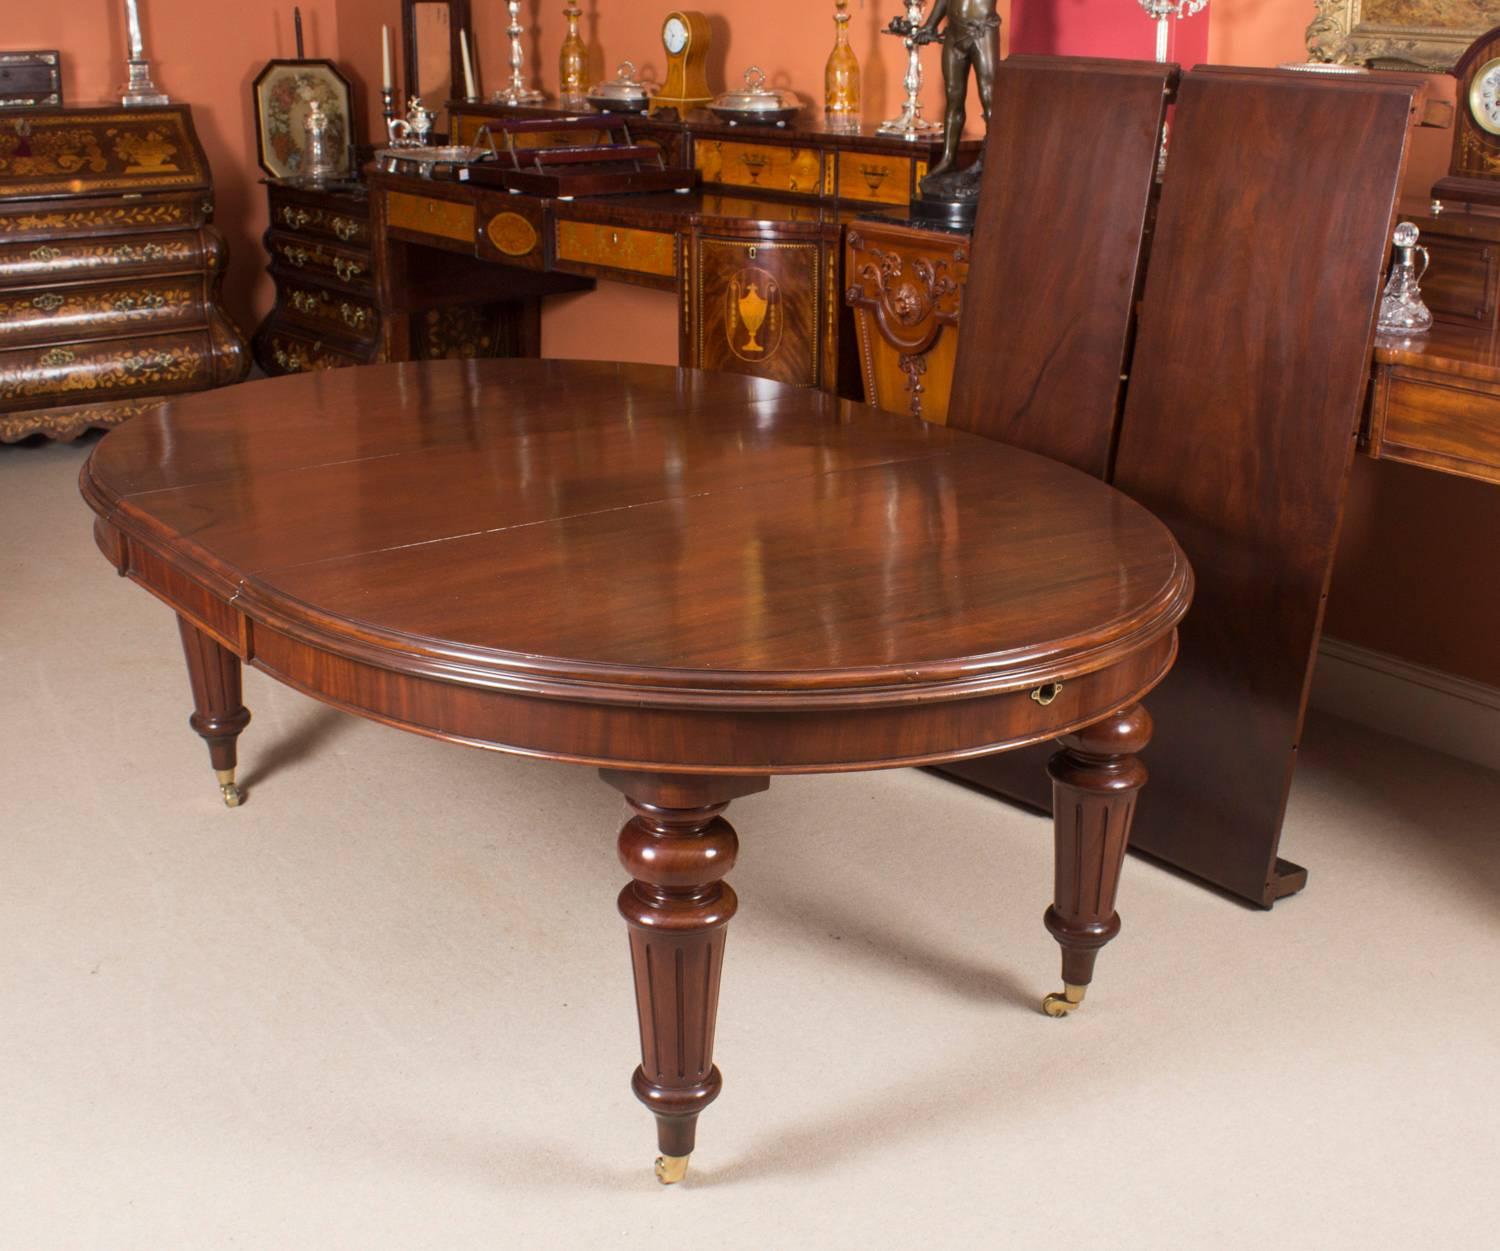 Hand-Crafted 19th Century Oval Extending Dining Table and Ten Balloon Back Dining Chairs